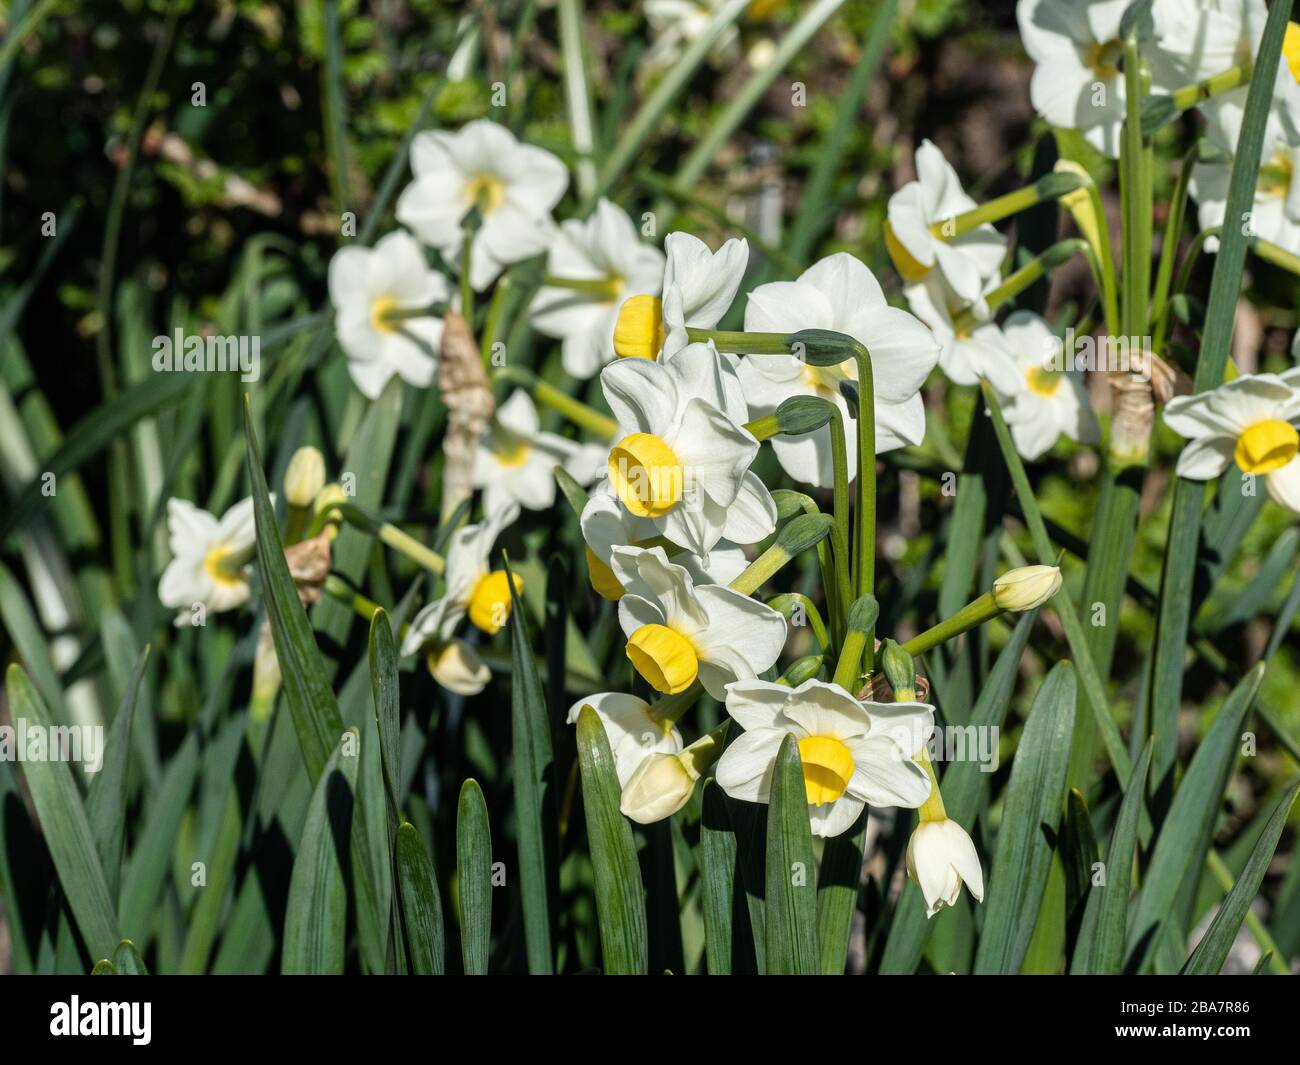 A group of the white and lemon yellow flowers of the tazetta daffodil Narcissus Avalanche Stock Photo